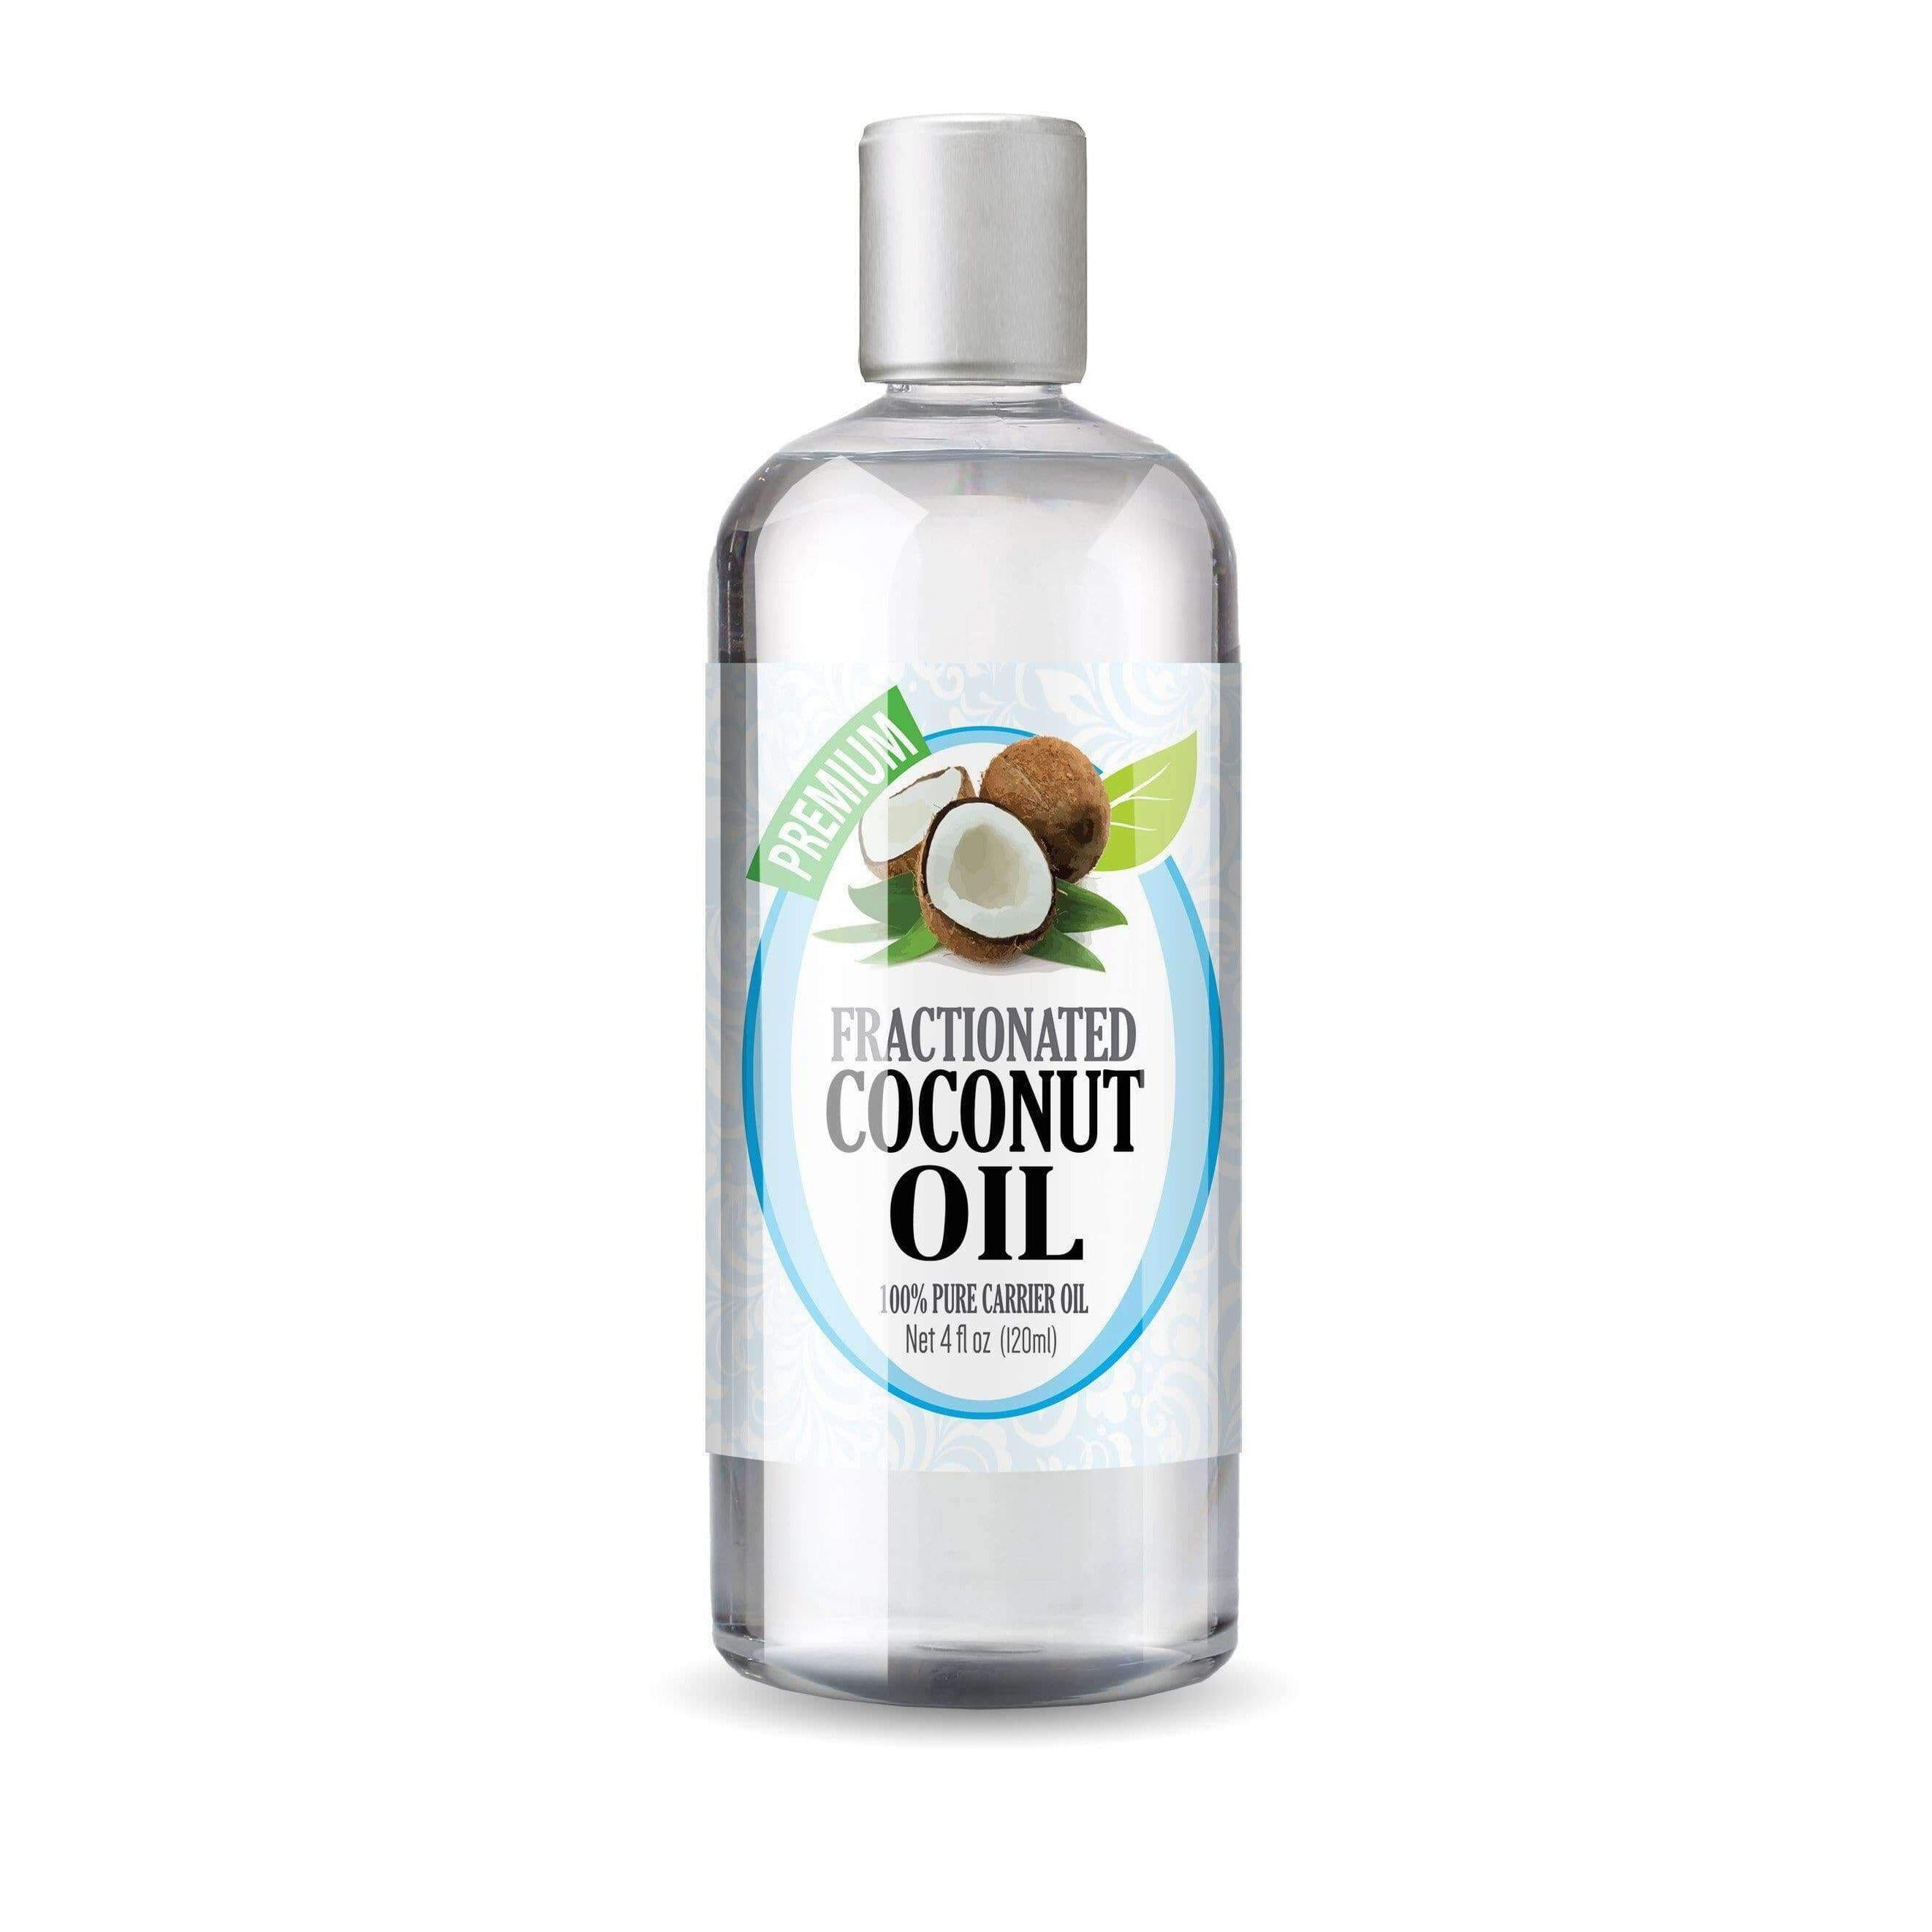 Why Use Fractionated Coconut Oil With Essential Oils?